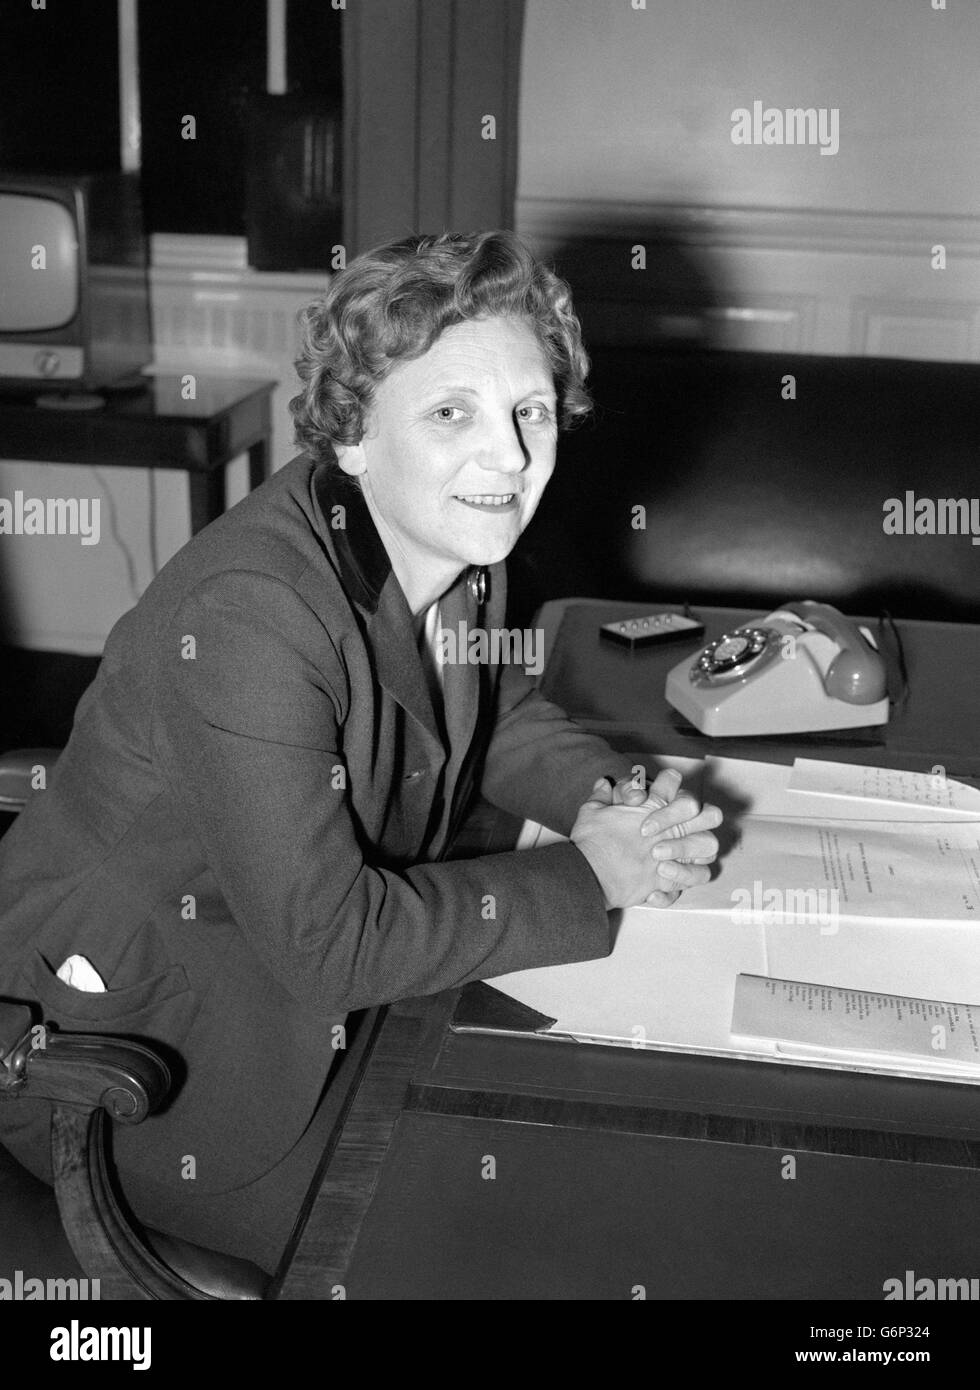 New woman member of Harold Macmillan's government, Miss Mervyn Pike, is pictured at the General Post Office Headquarters, London. She was appointed Assistant Postmaster General in the Prime Minister's post-election government reconstruction. Stock Photo